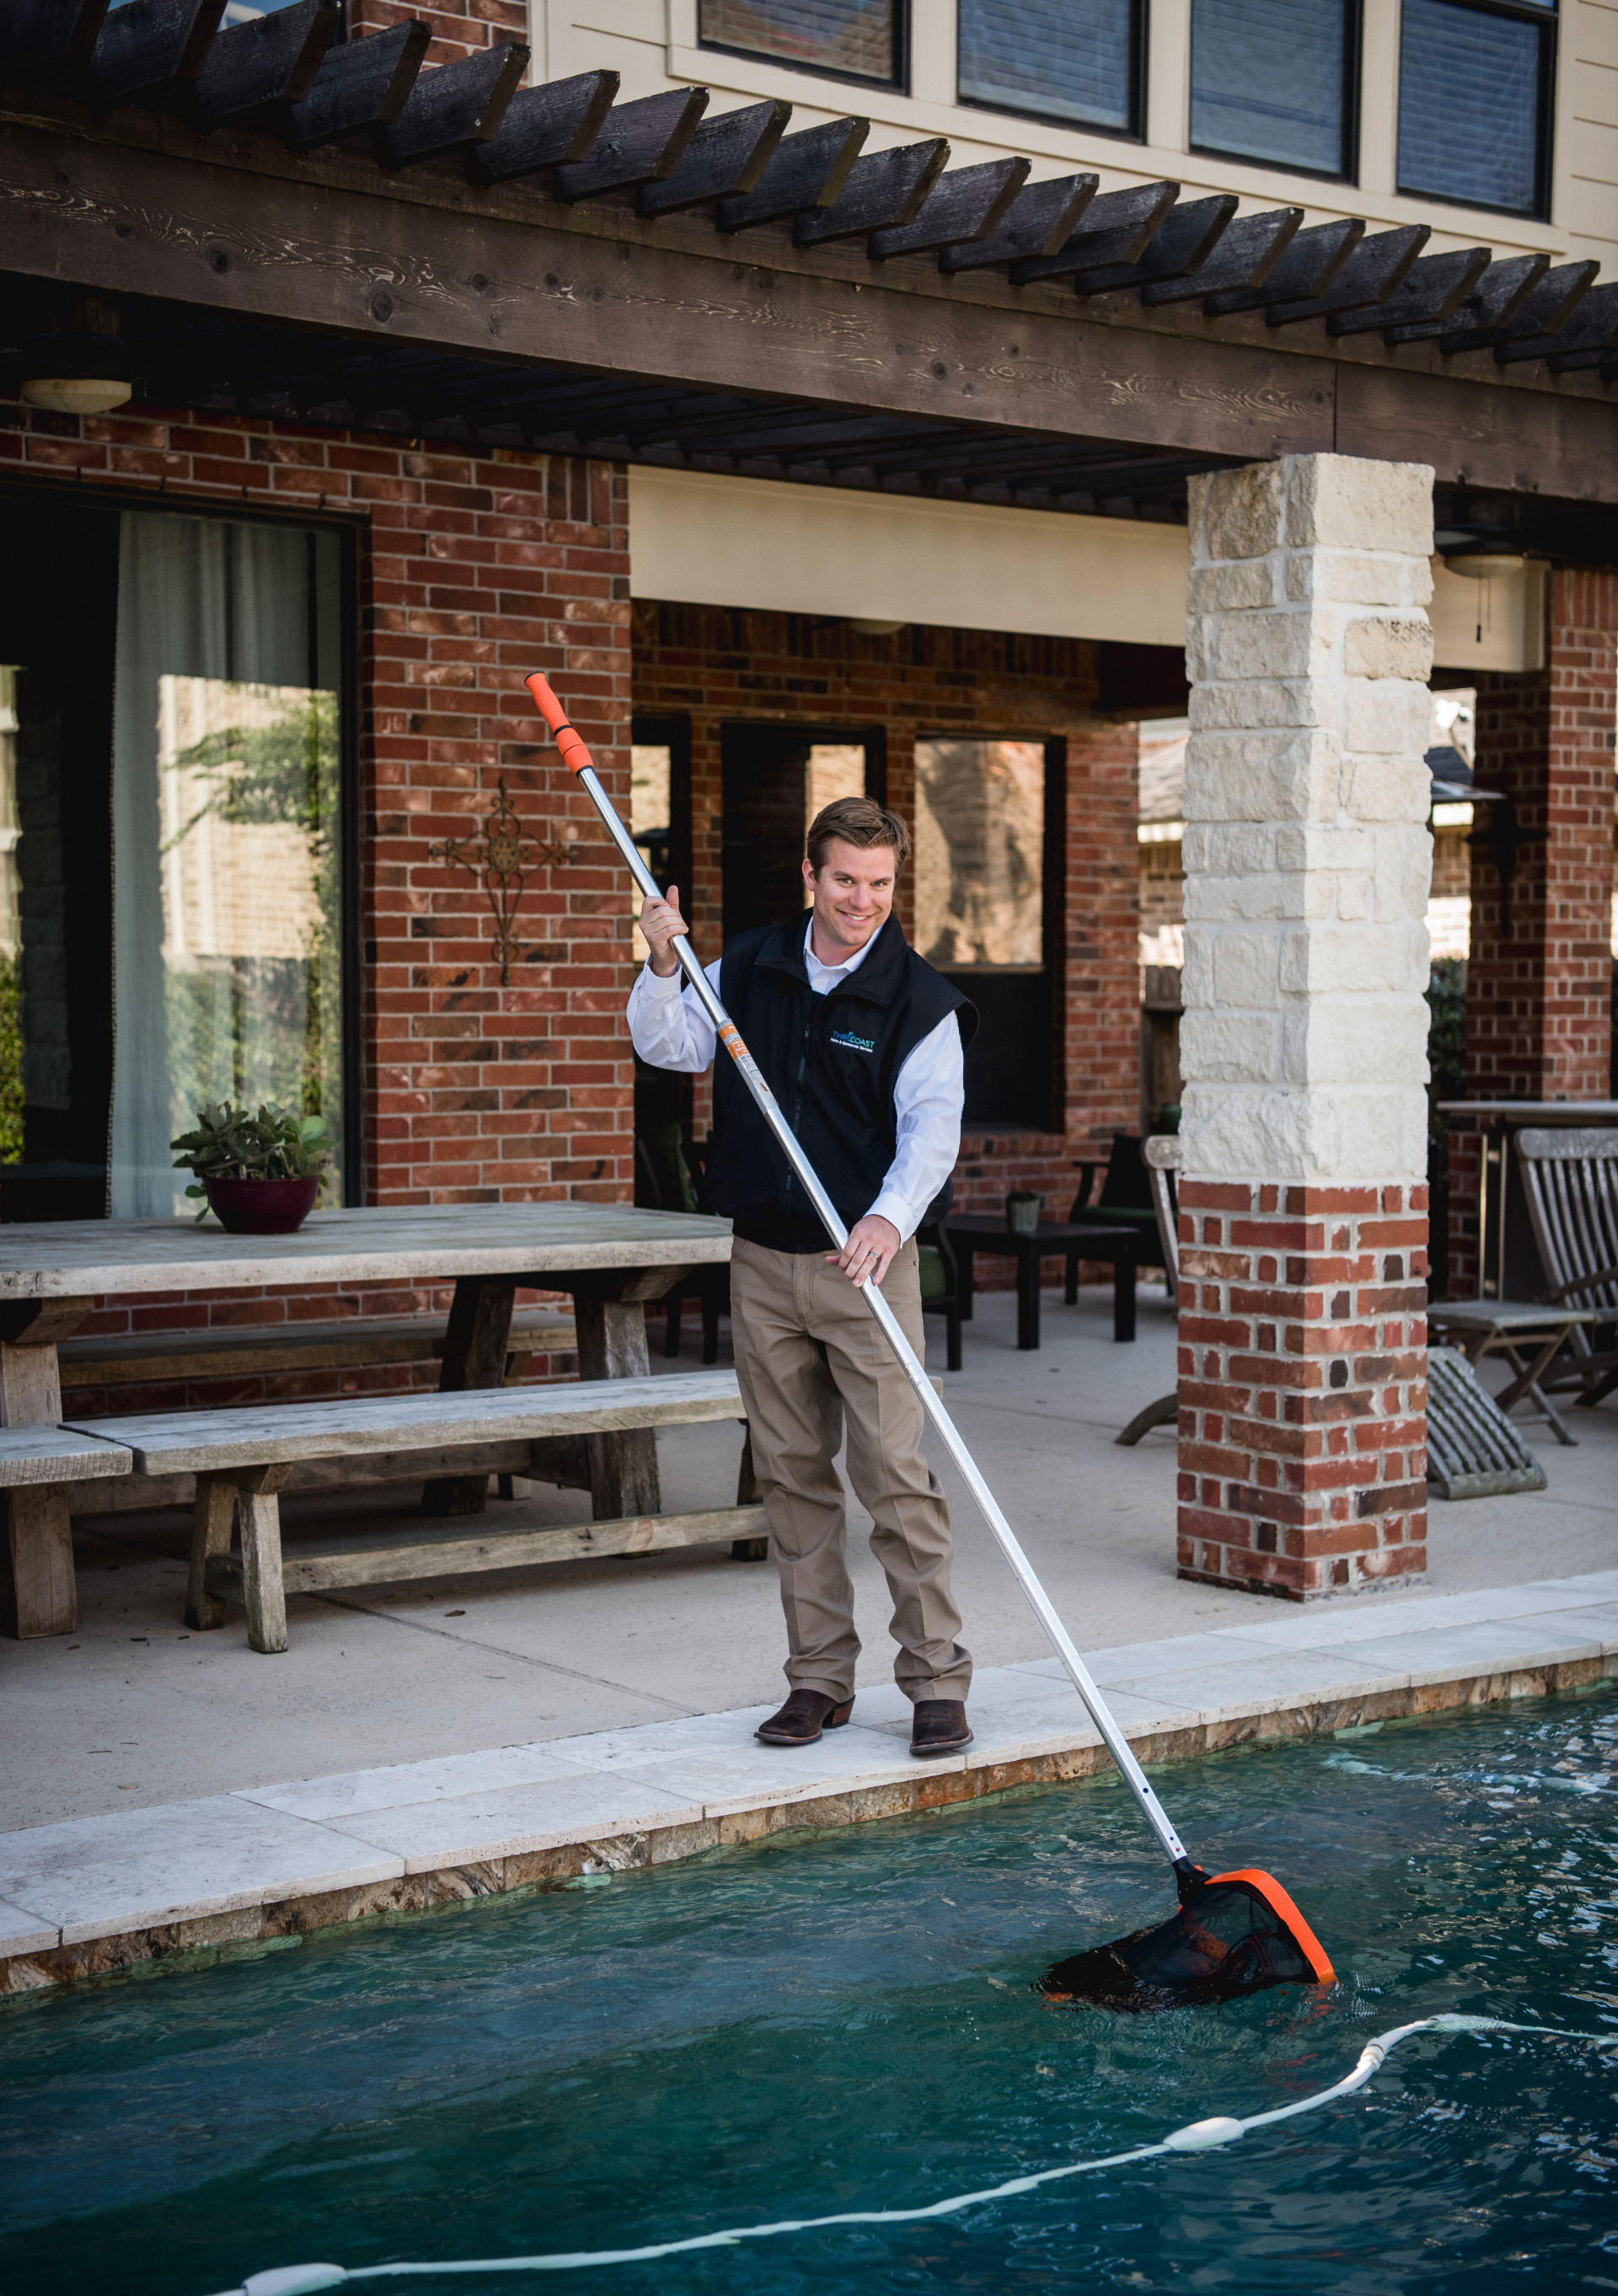 Our weekly pool cleaning service includes weekly debris and leaves removal, brushing out sediments, submerging a pool vacuum head and hose. We maintain every part of your pool equipment according to manufacturer’s specification. Trust us for a superior pool cleaning service.